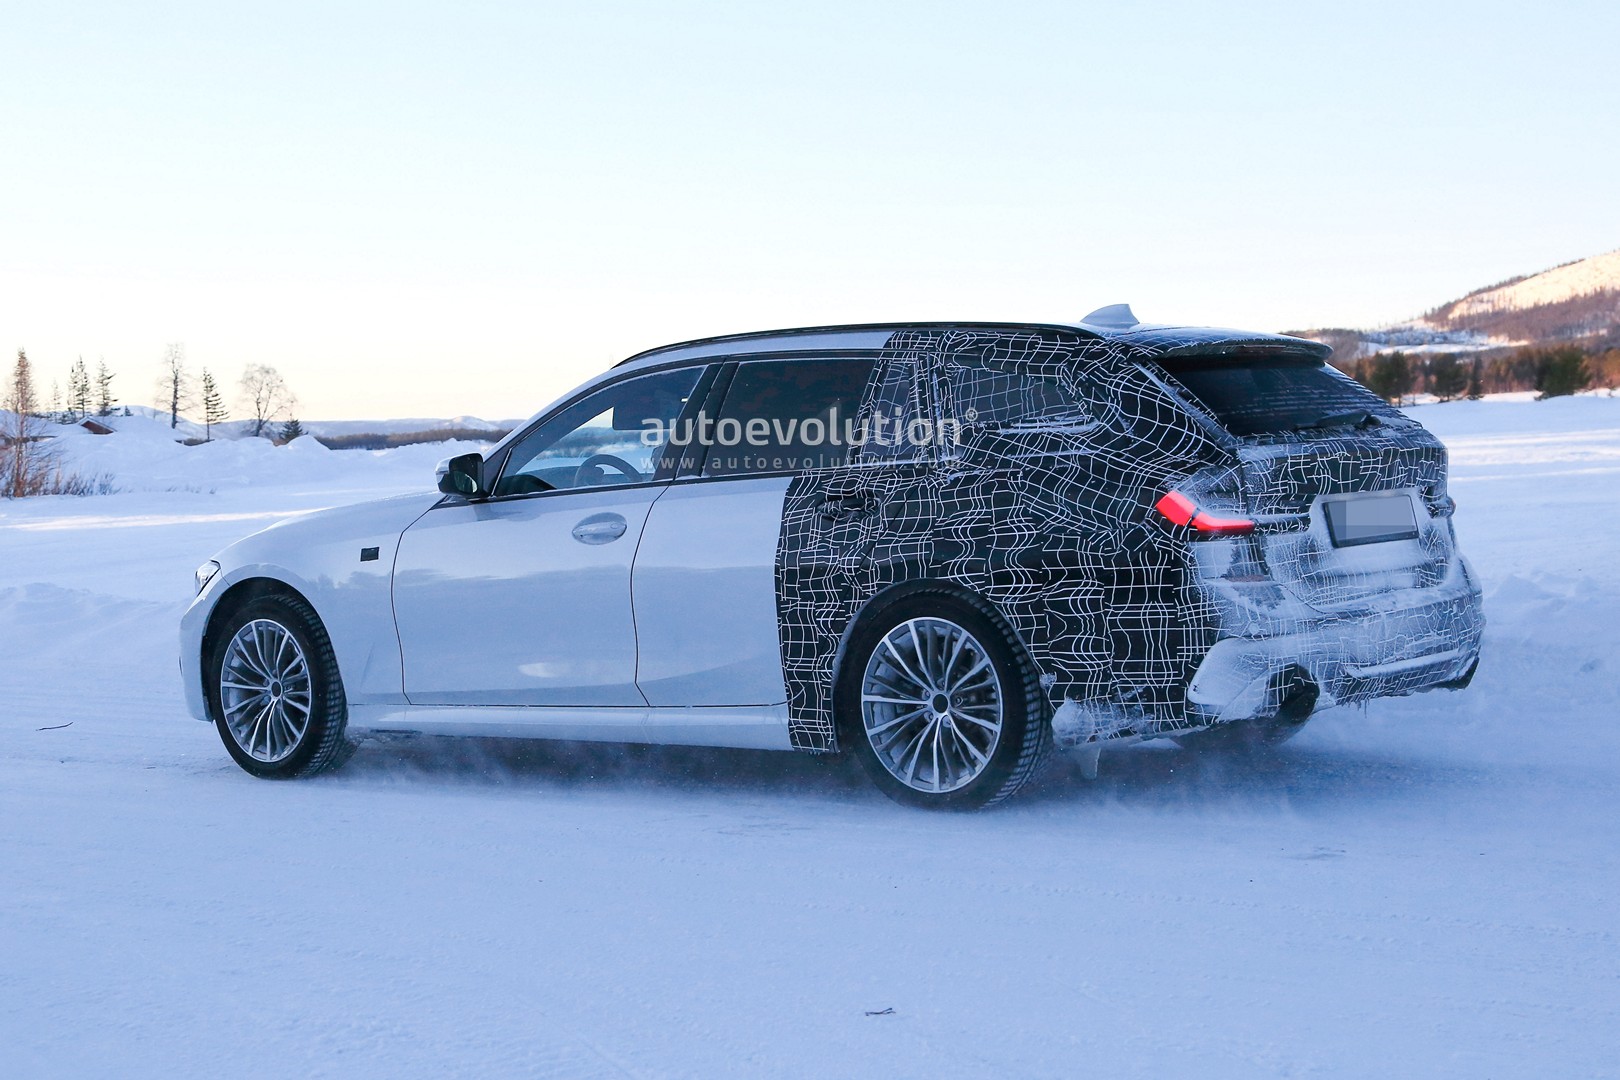 2020-bmw-3-series-touring-spied-winter-testing-with-m-sport-package_5.jpg